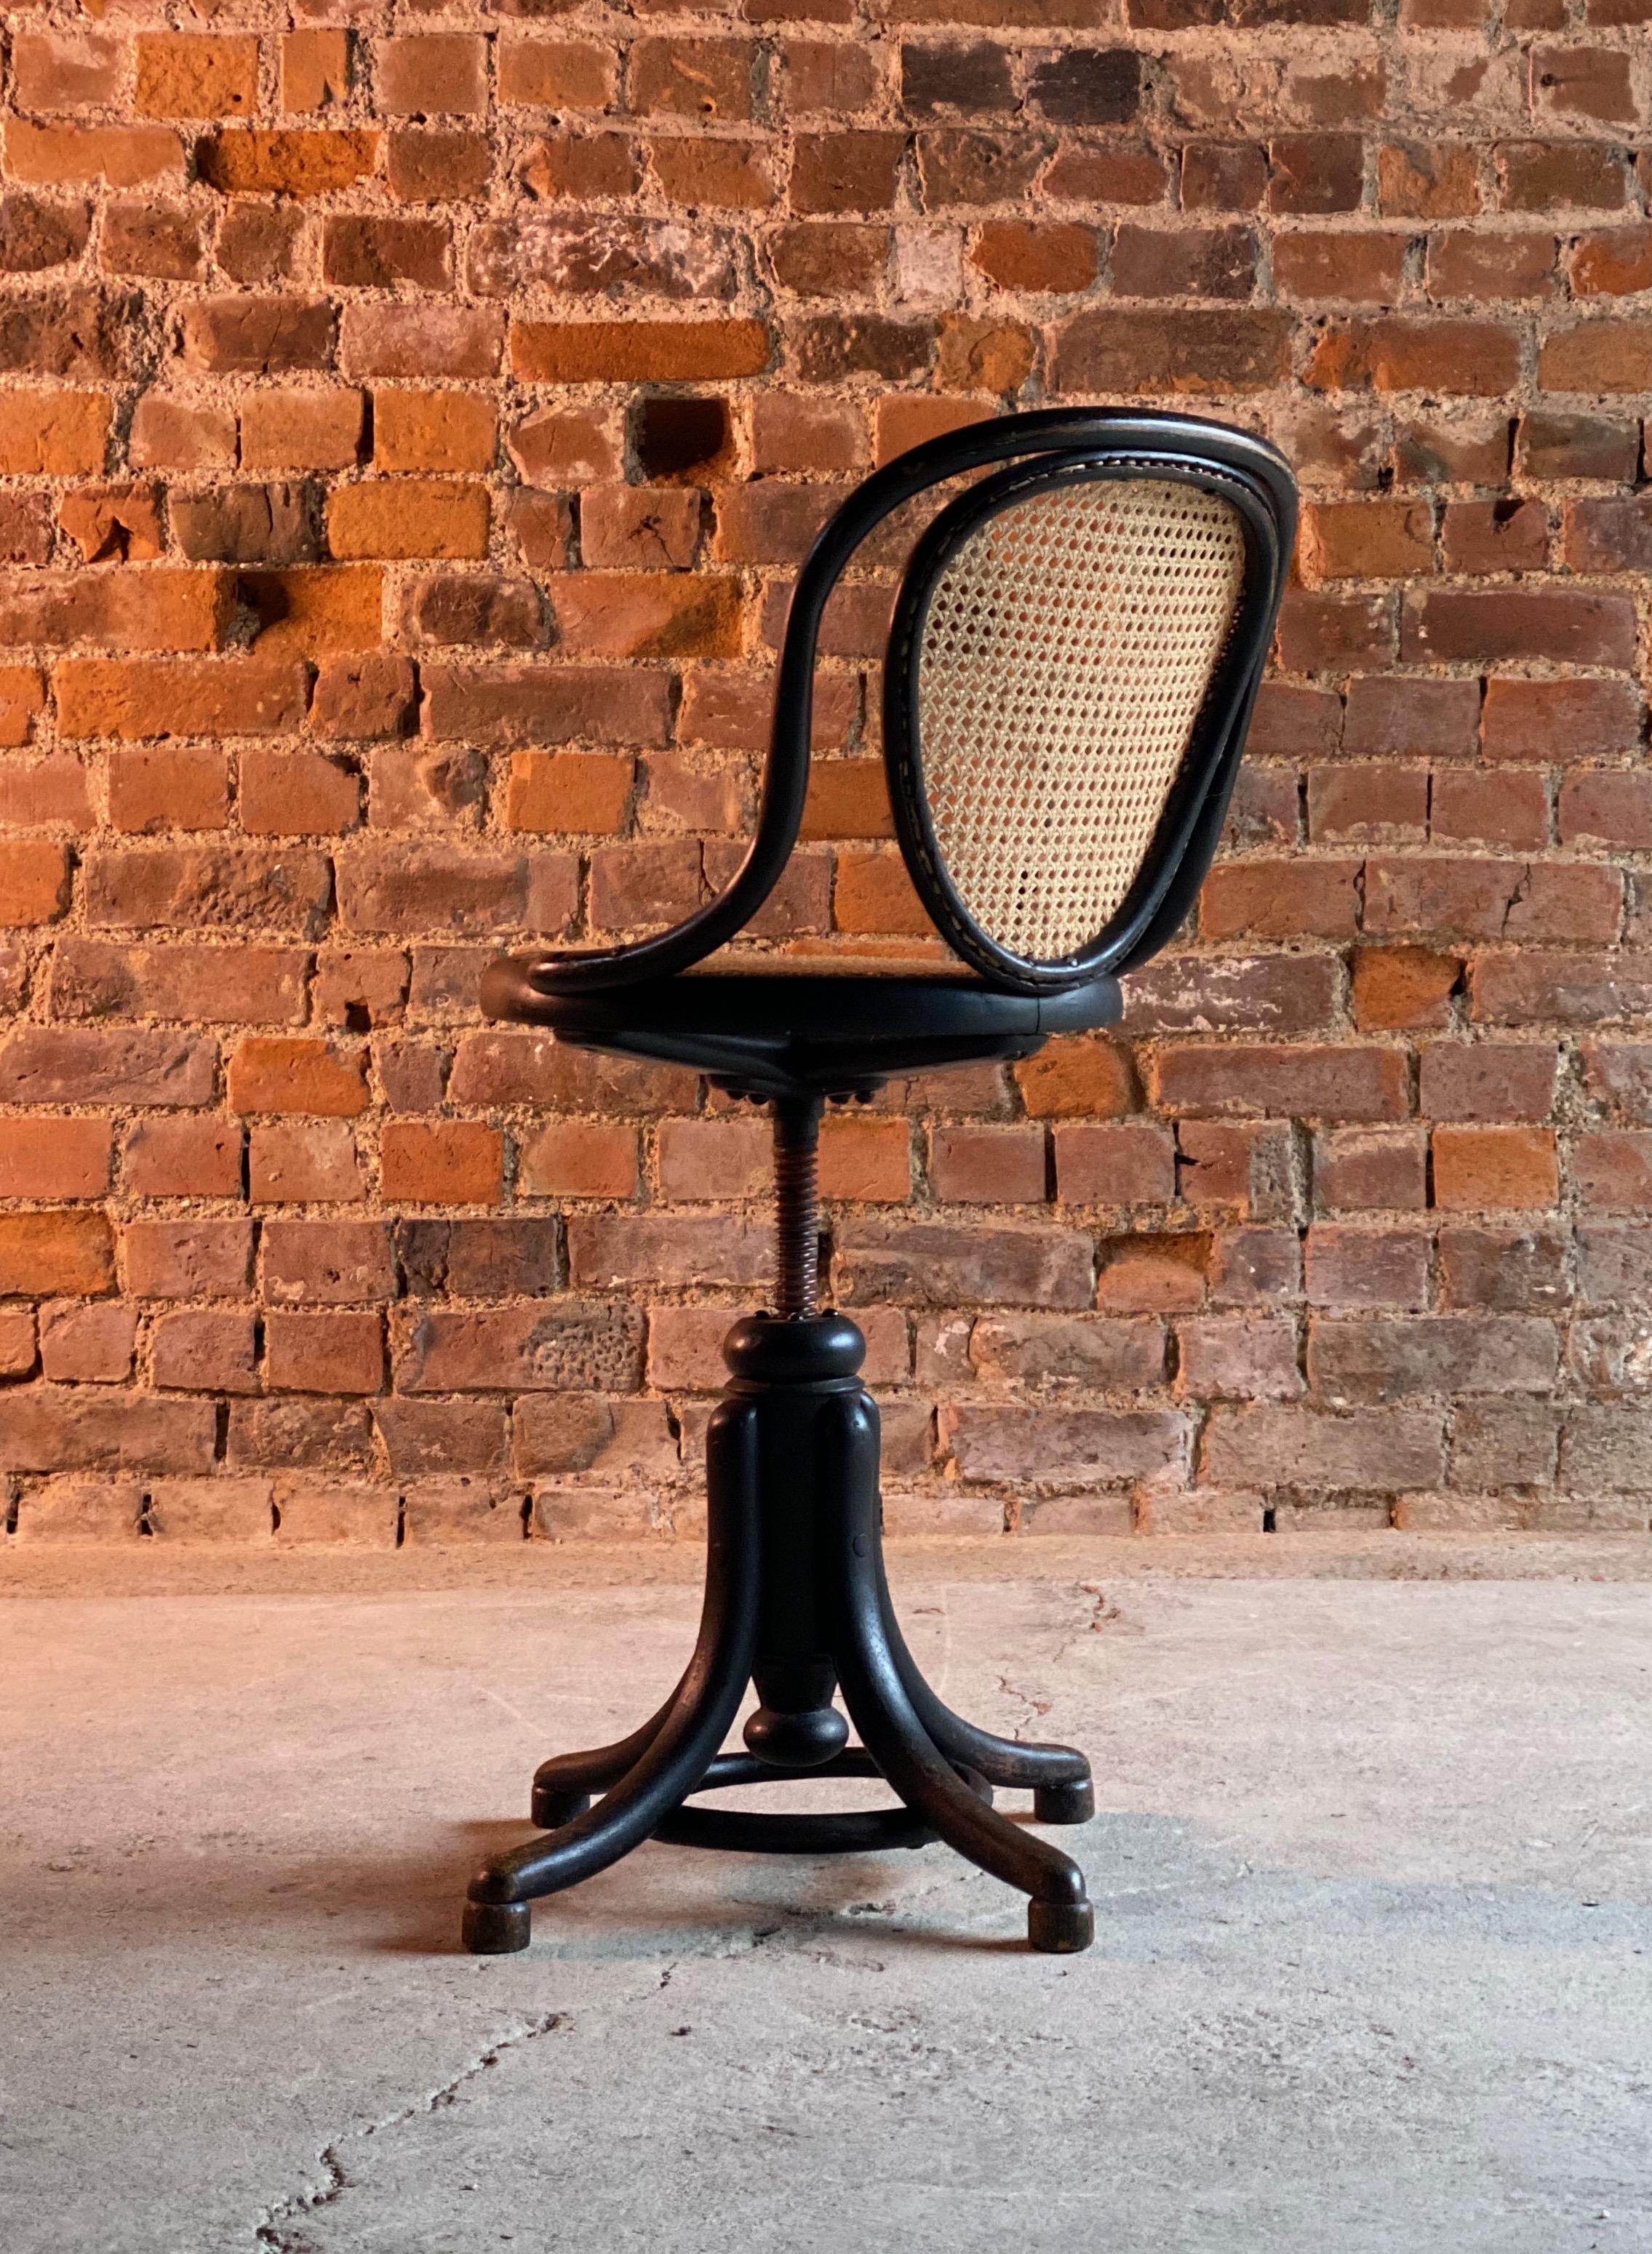 Thonet ebonized bentwood swivel office chair Austria circa 1900

cagnificent rare Thonet ebonized bentwood swivel office desk chair dating to early 20th century circa 1900, with cane back and circular seat, adjusting on a metal thread to four